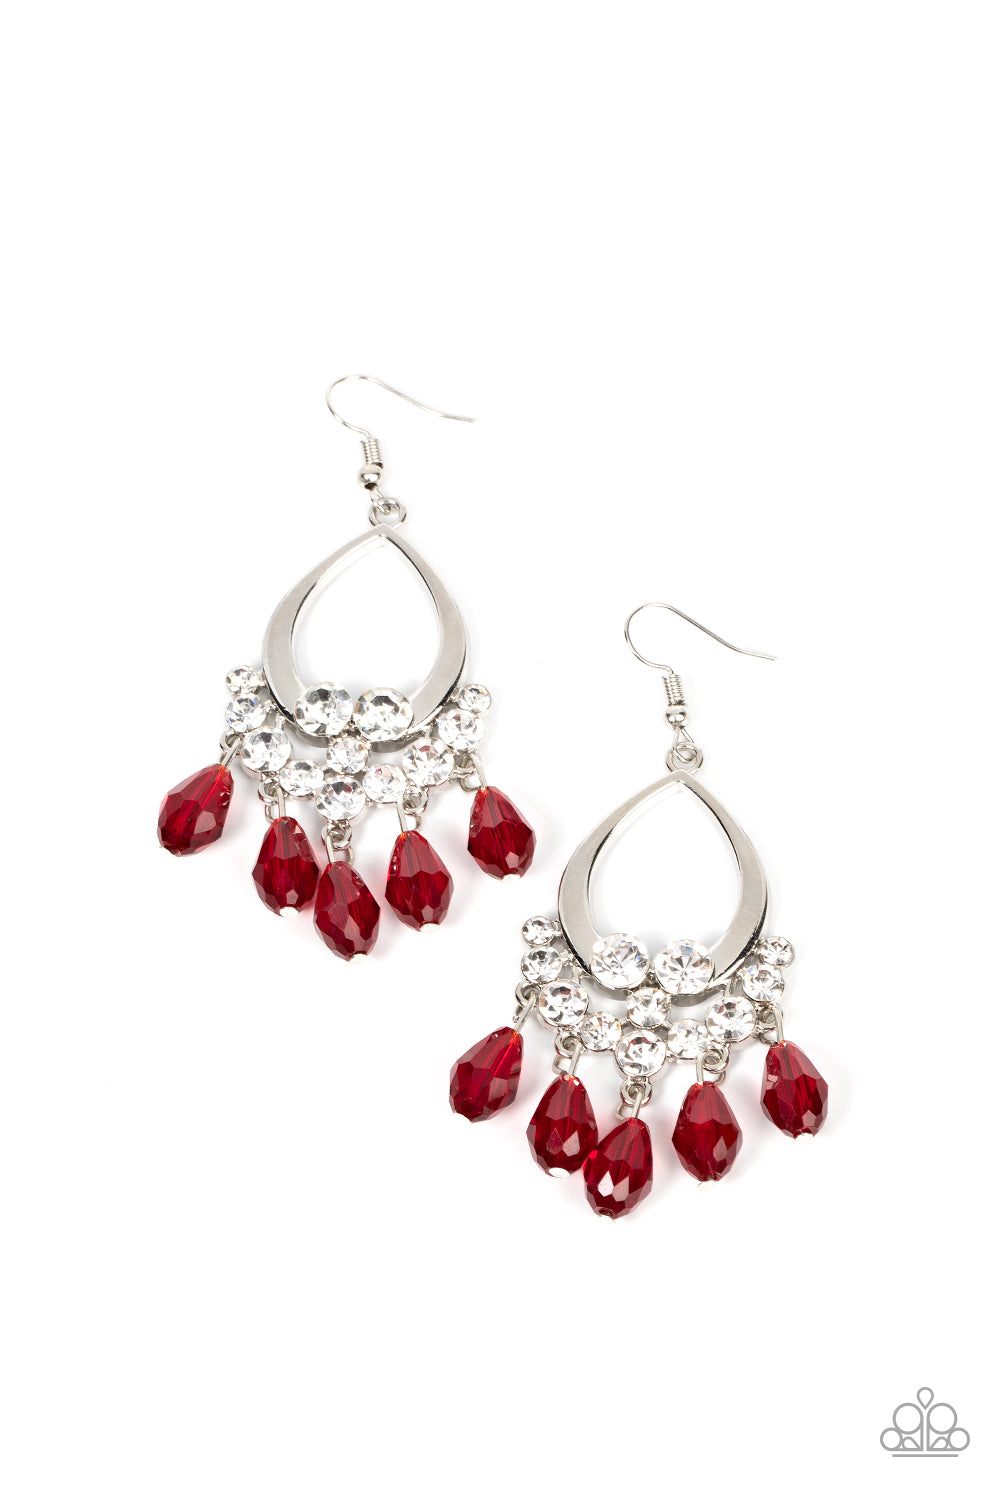 Paparazzi Famous Fashionista - Red Earrings